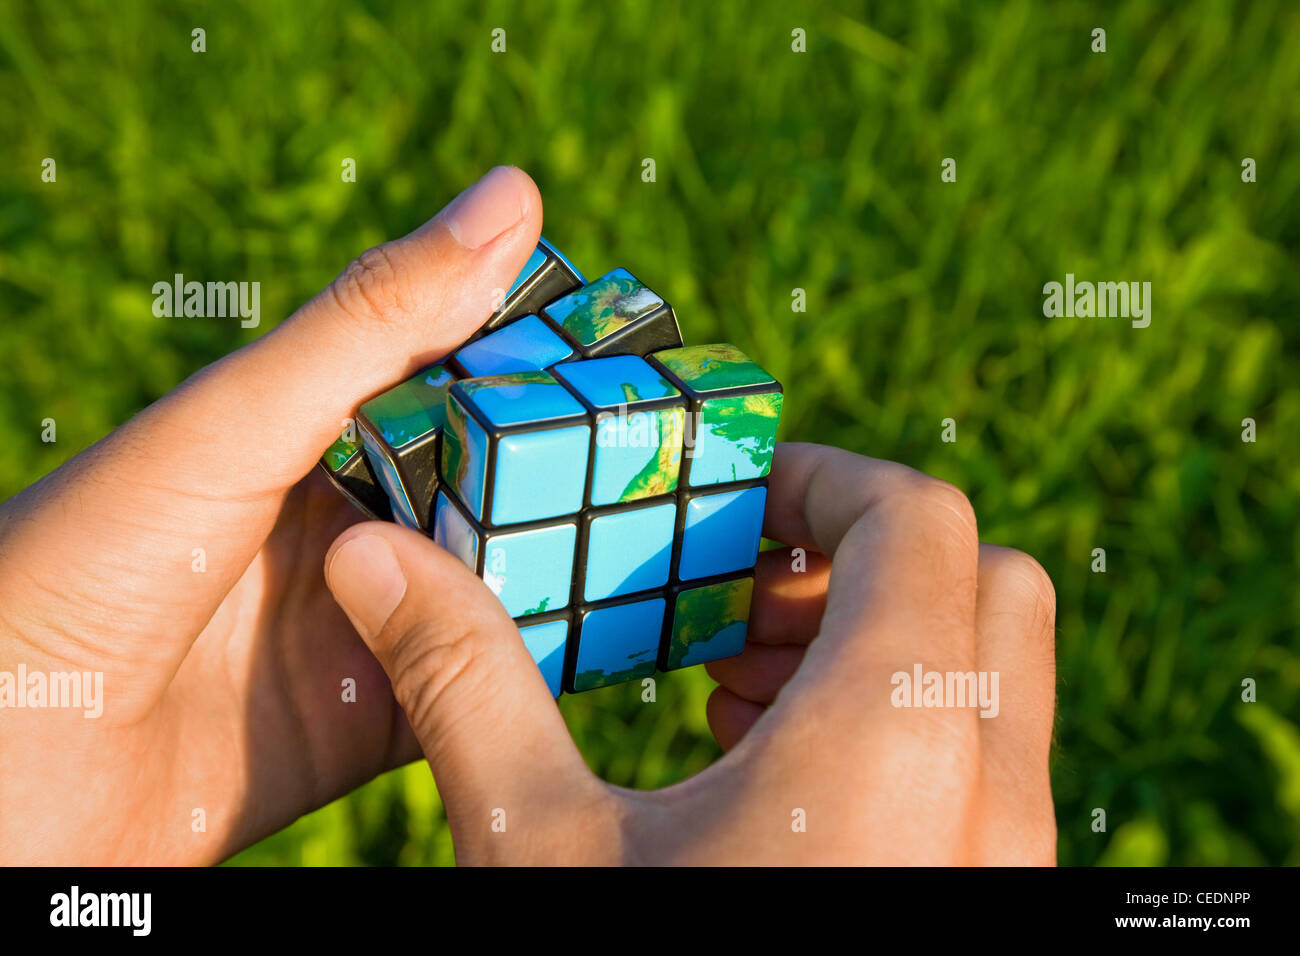 Cube in the manner of planets land in hand on background of the herb Stock Photo